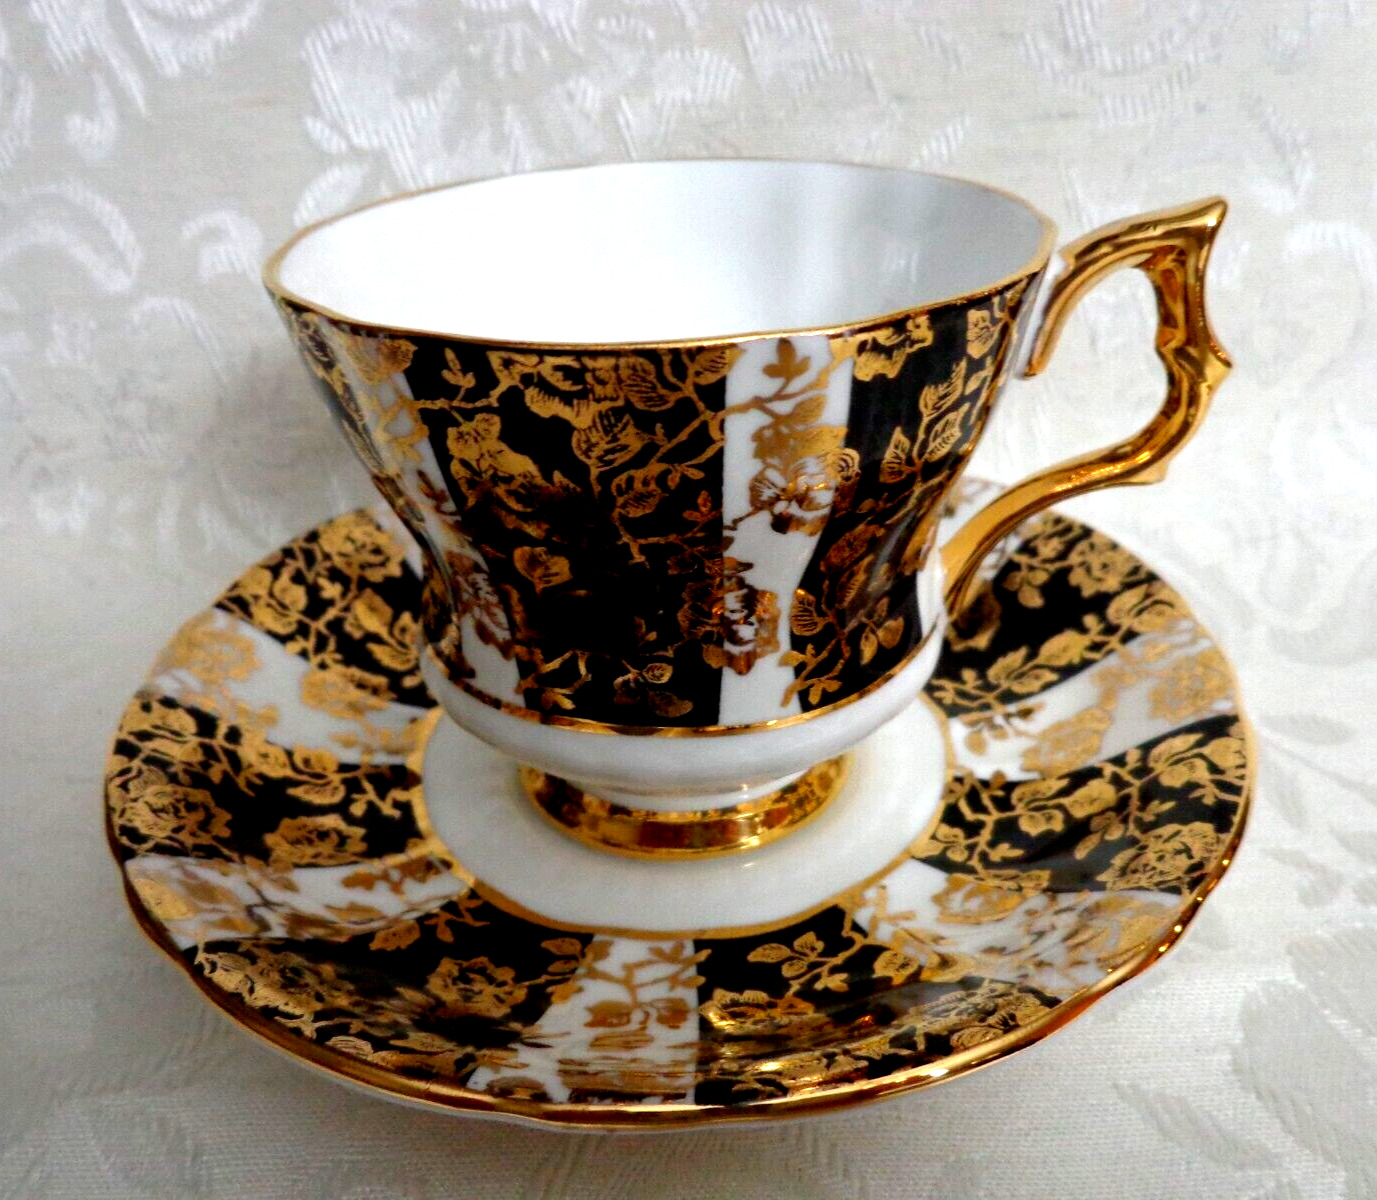 Royal Windsor Black & White with Floral Chintz Design Tea Cup & Saucer  England